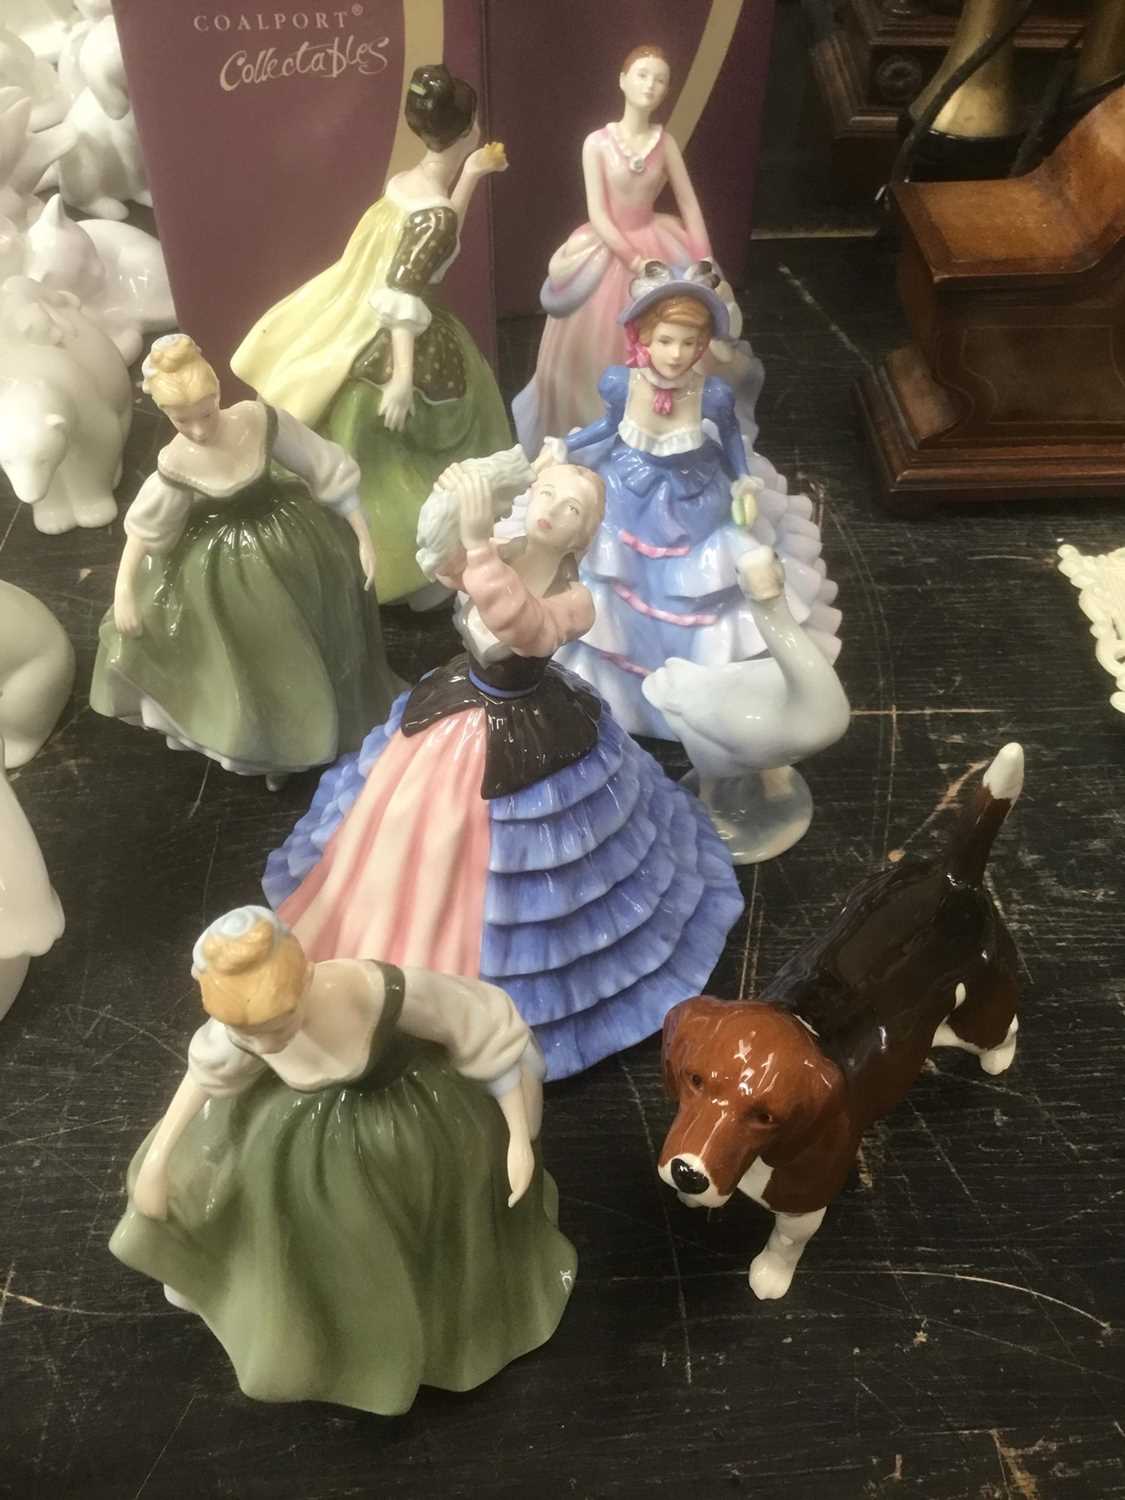 Collection of Coalport figurines and others